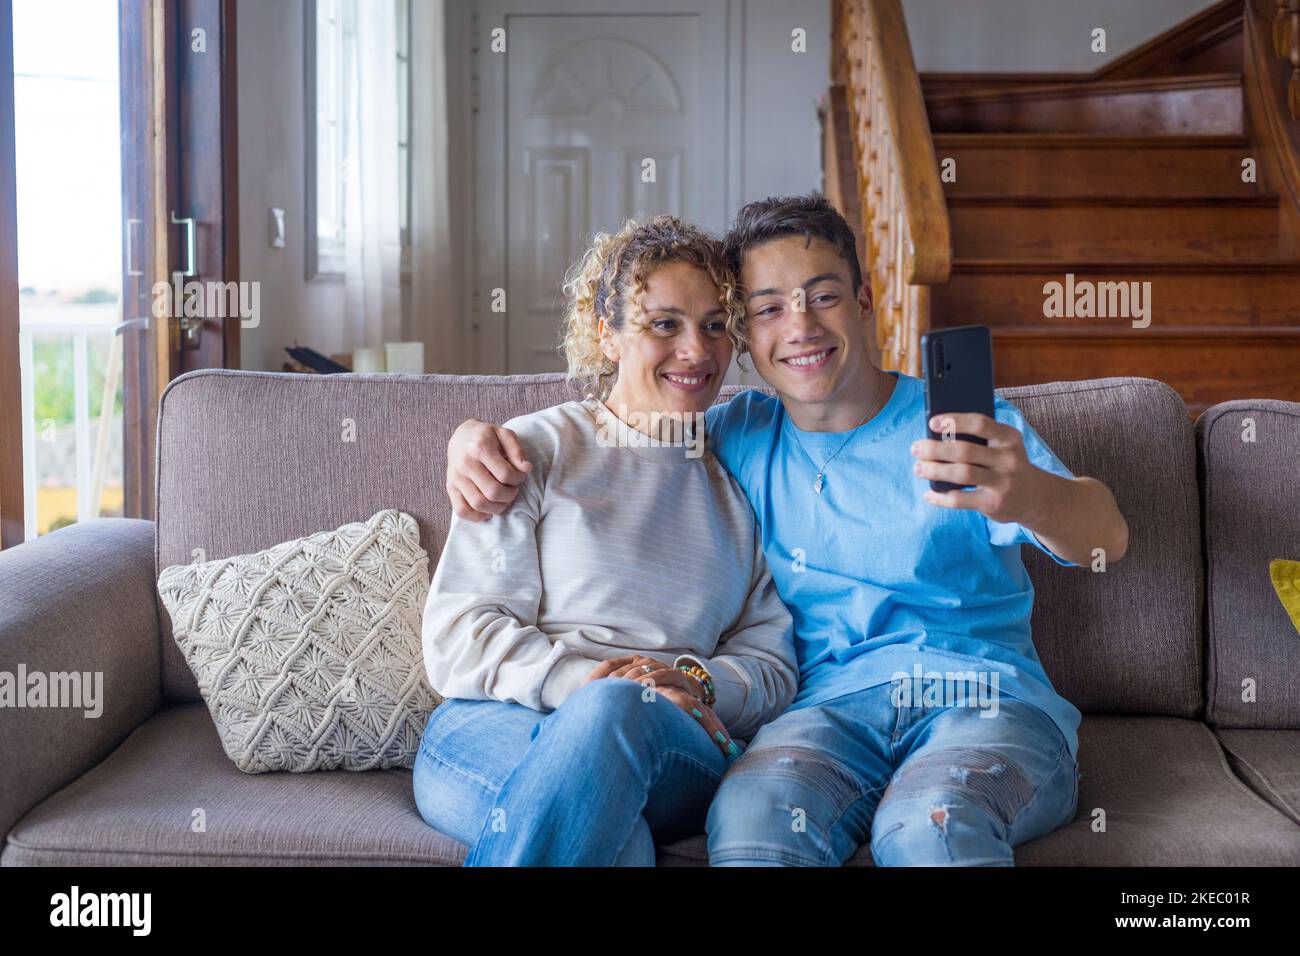 Smiling middle-aged 40s mother rest with grown-up son using smartphone together, happy young man enjoy family weekend with mom taking a selfie, have fun at home Stock Photo